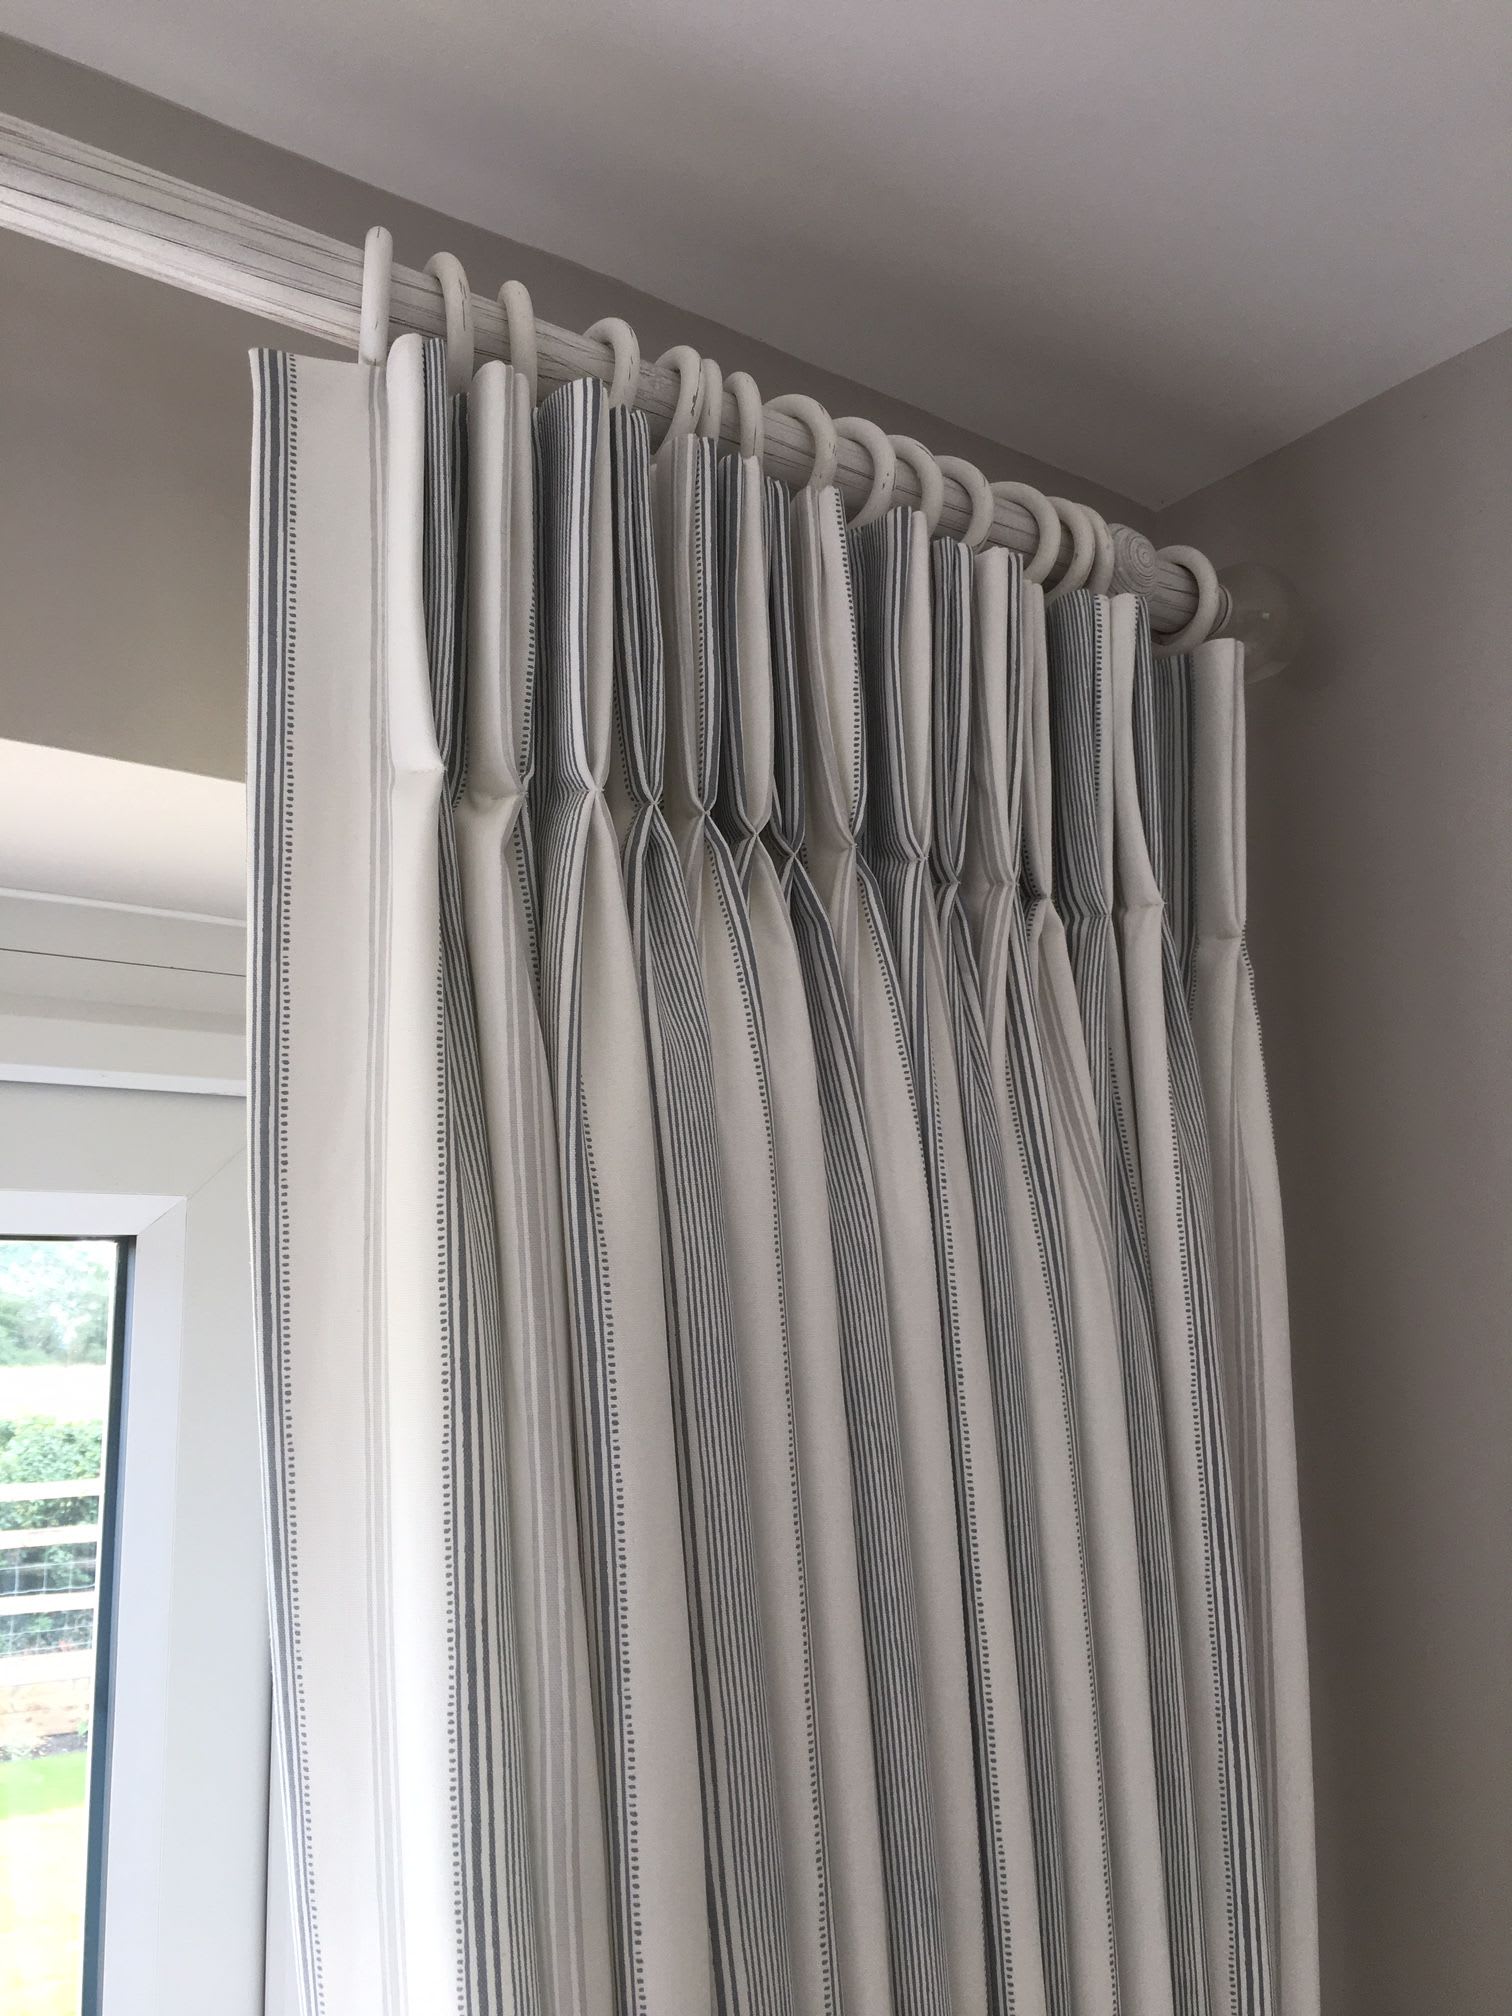 Images Graham Horniblew Curtains & Blinds